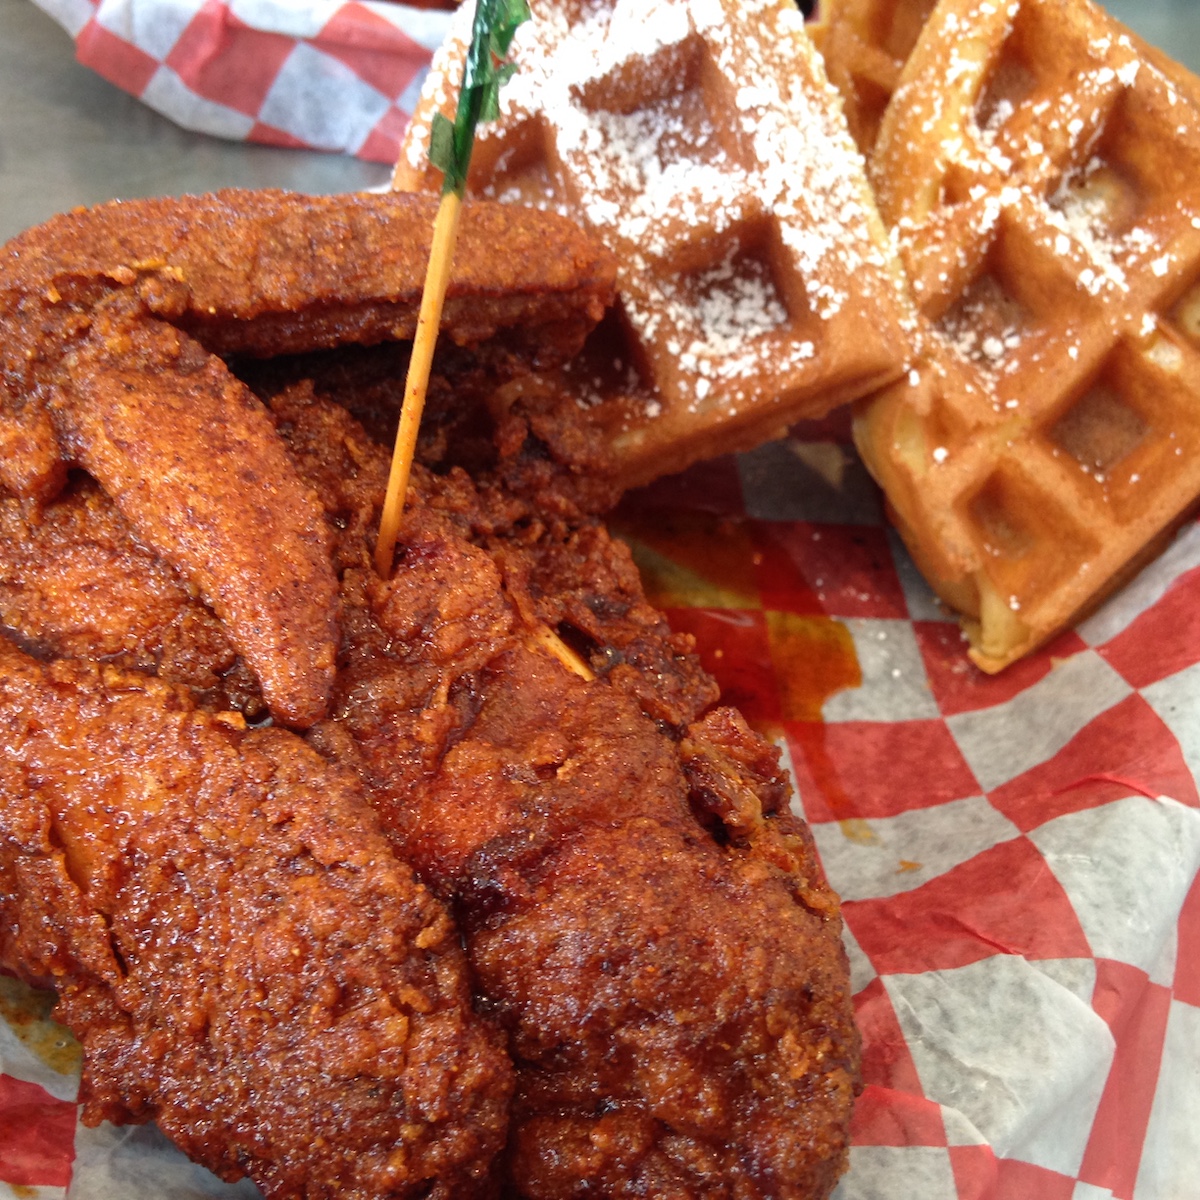 Hot Chicken and Waffles from Hattie B's in Nashville, Tennessee